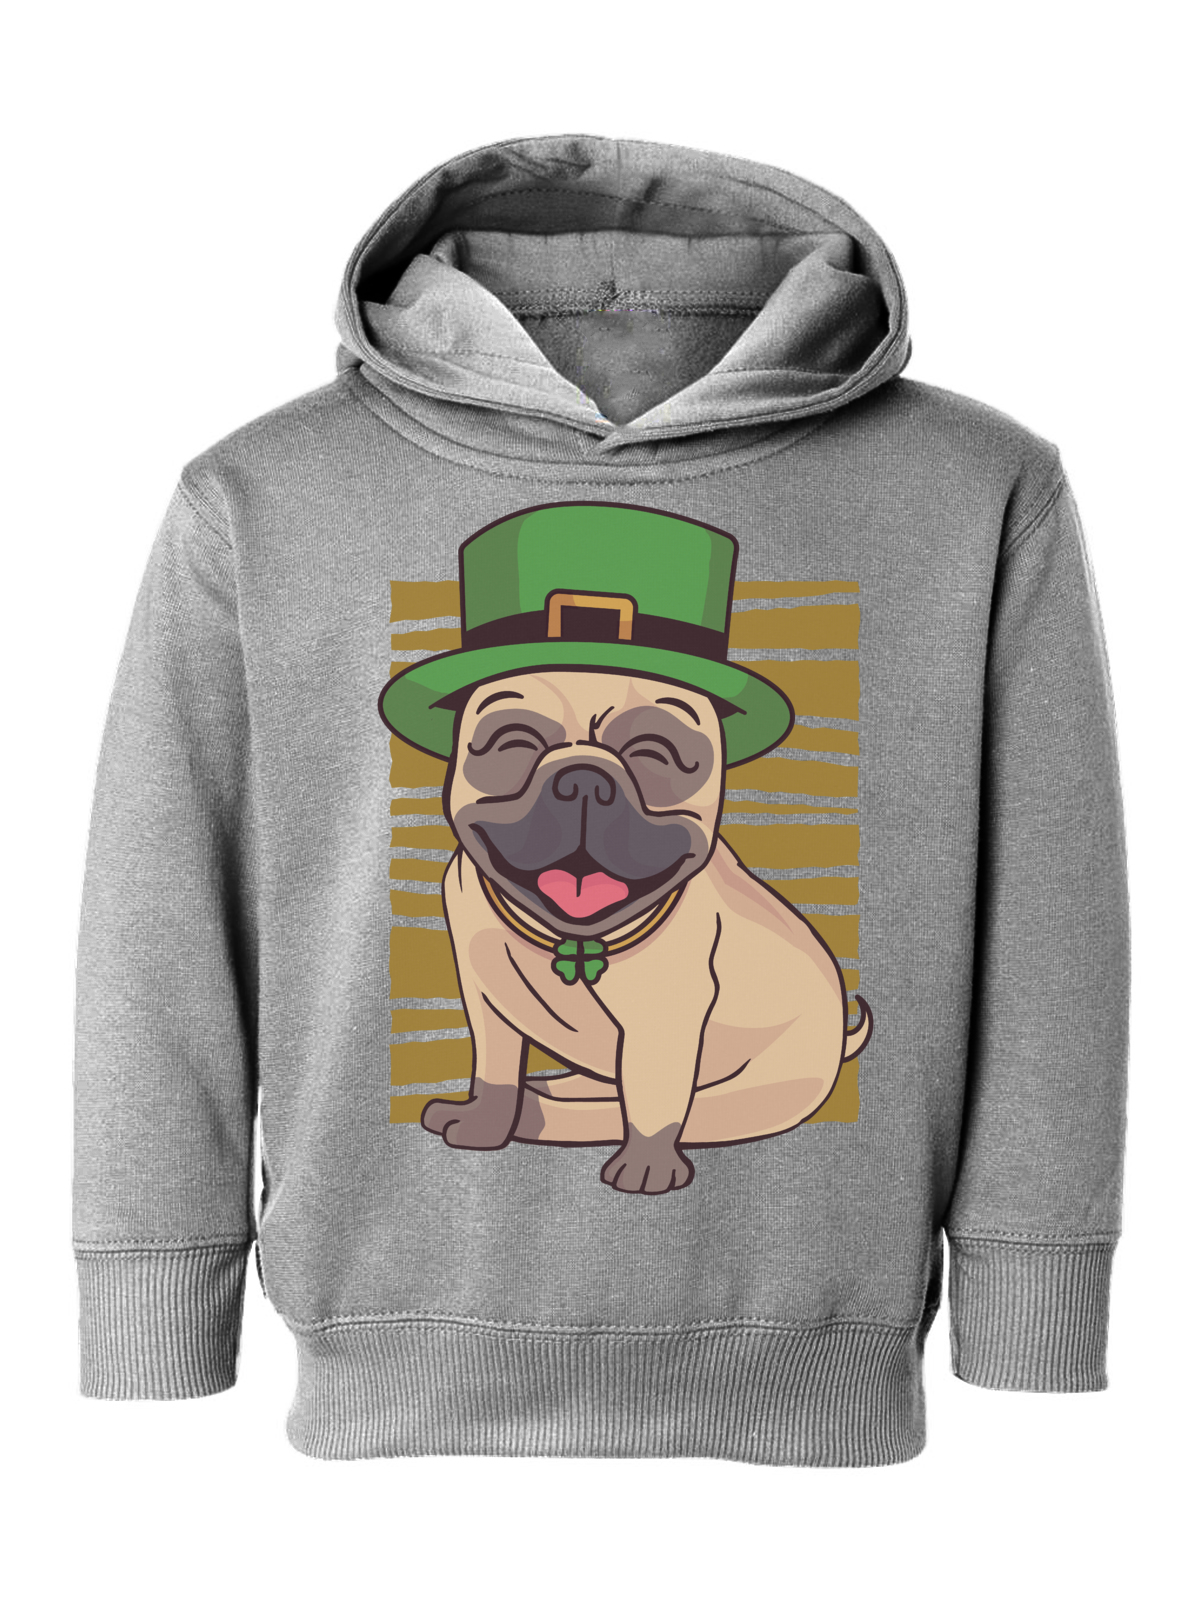 Awkward Styles Irish Day Toddler Hoodie Pug in Green Hat Hooded Sweatshirt for Kids Patrick's Day - image 1 of 4